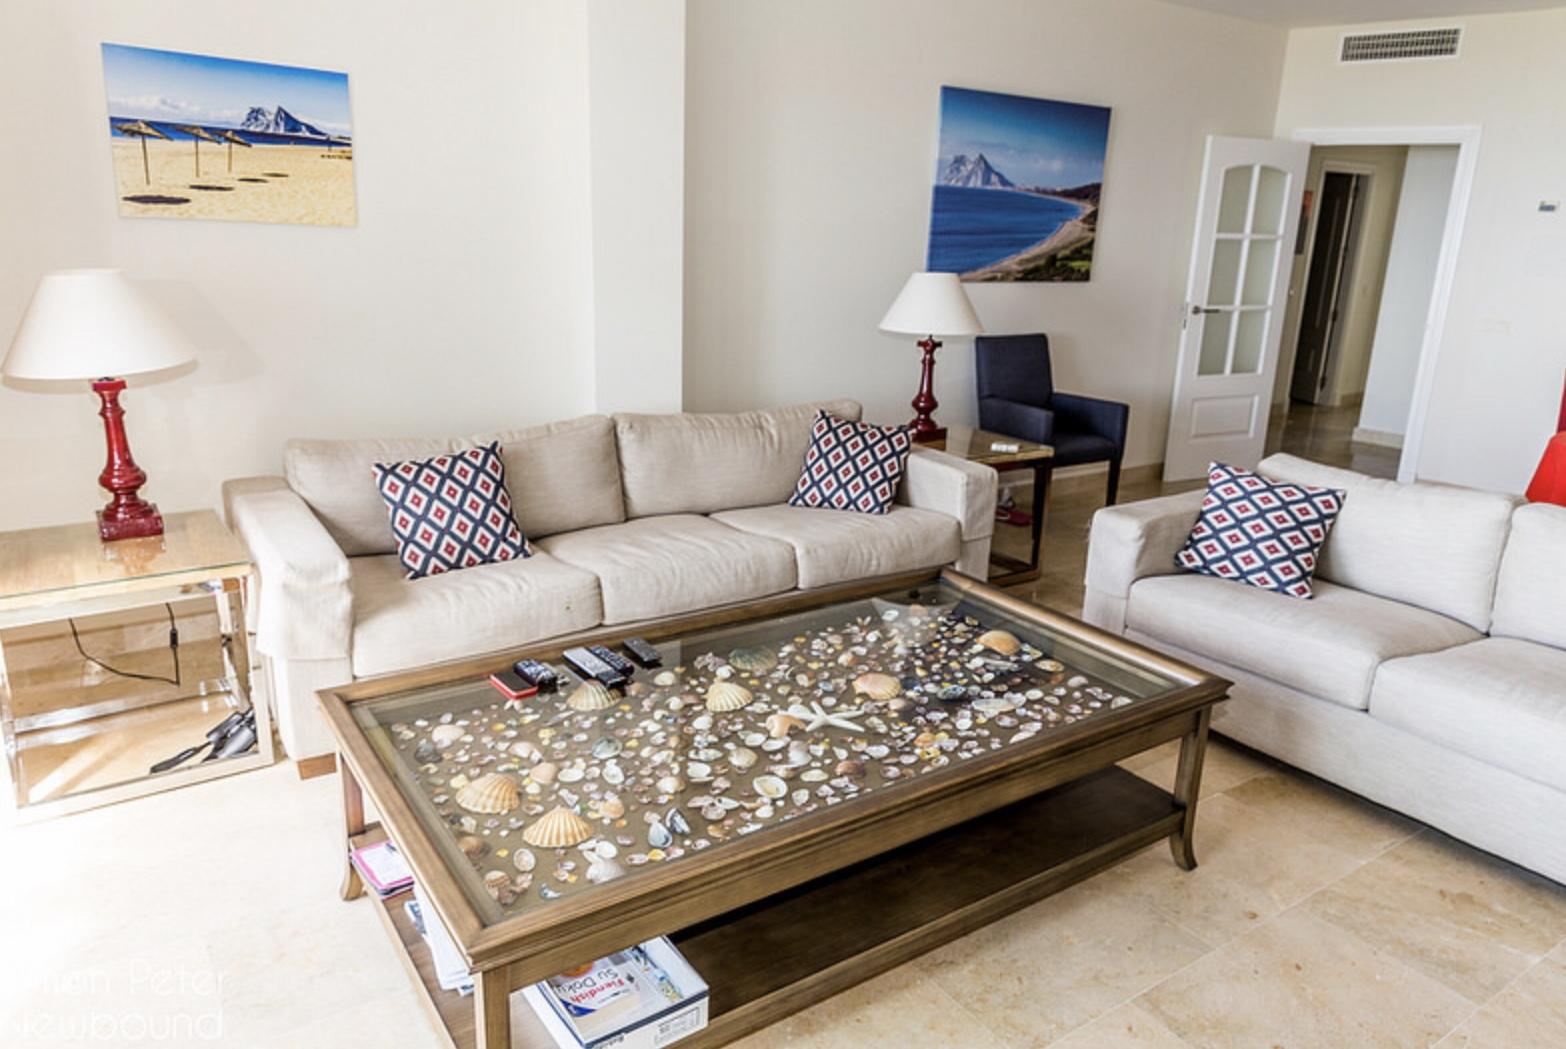 Spectacular sea views from this beautiful apartment located on the beachfront